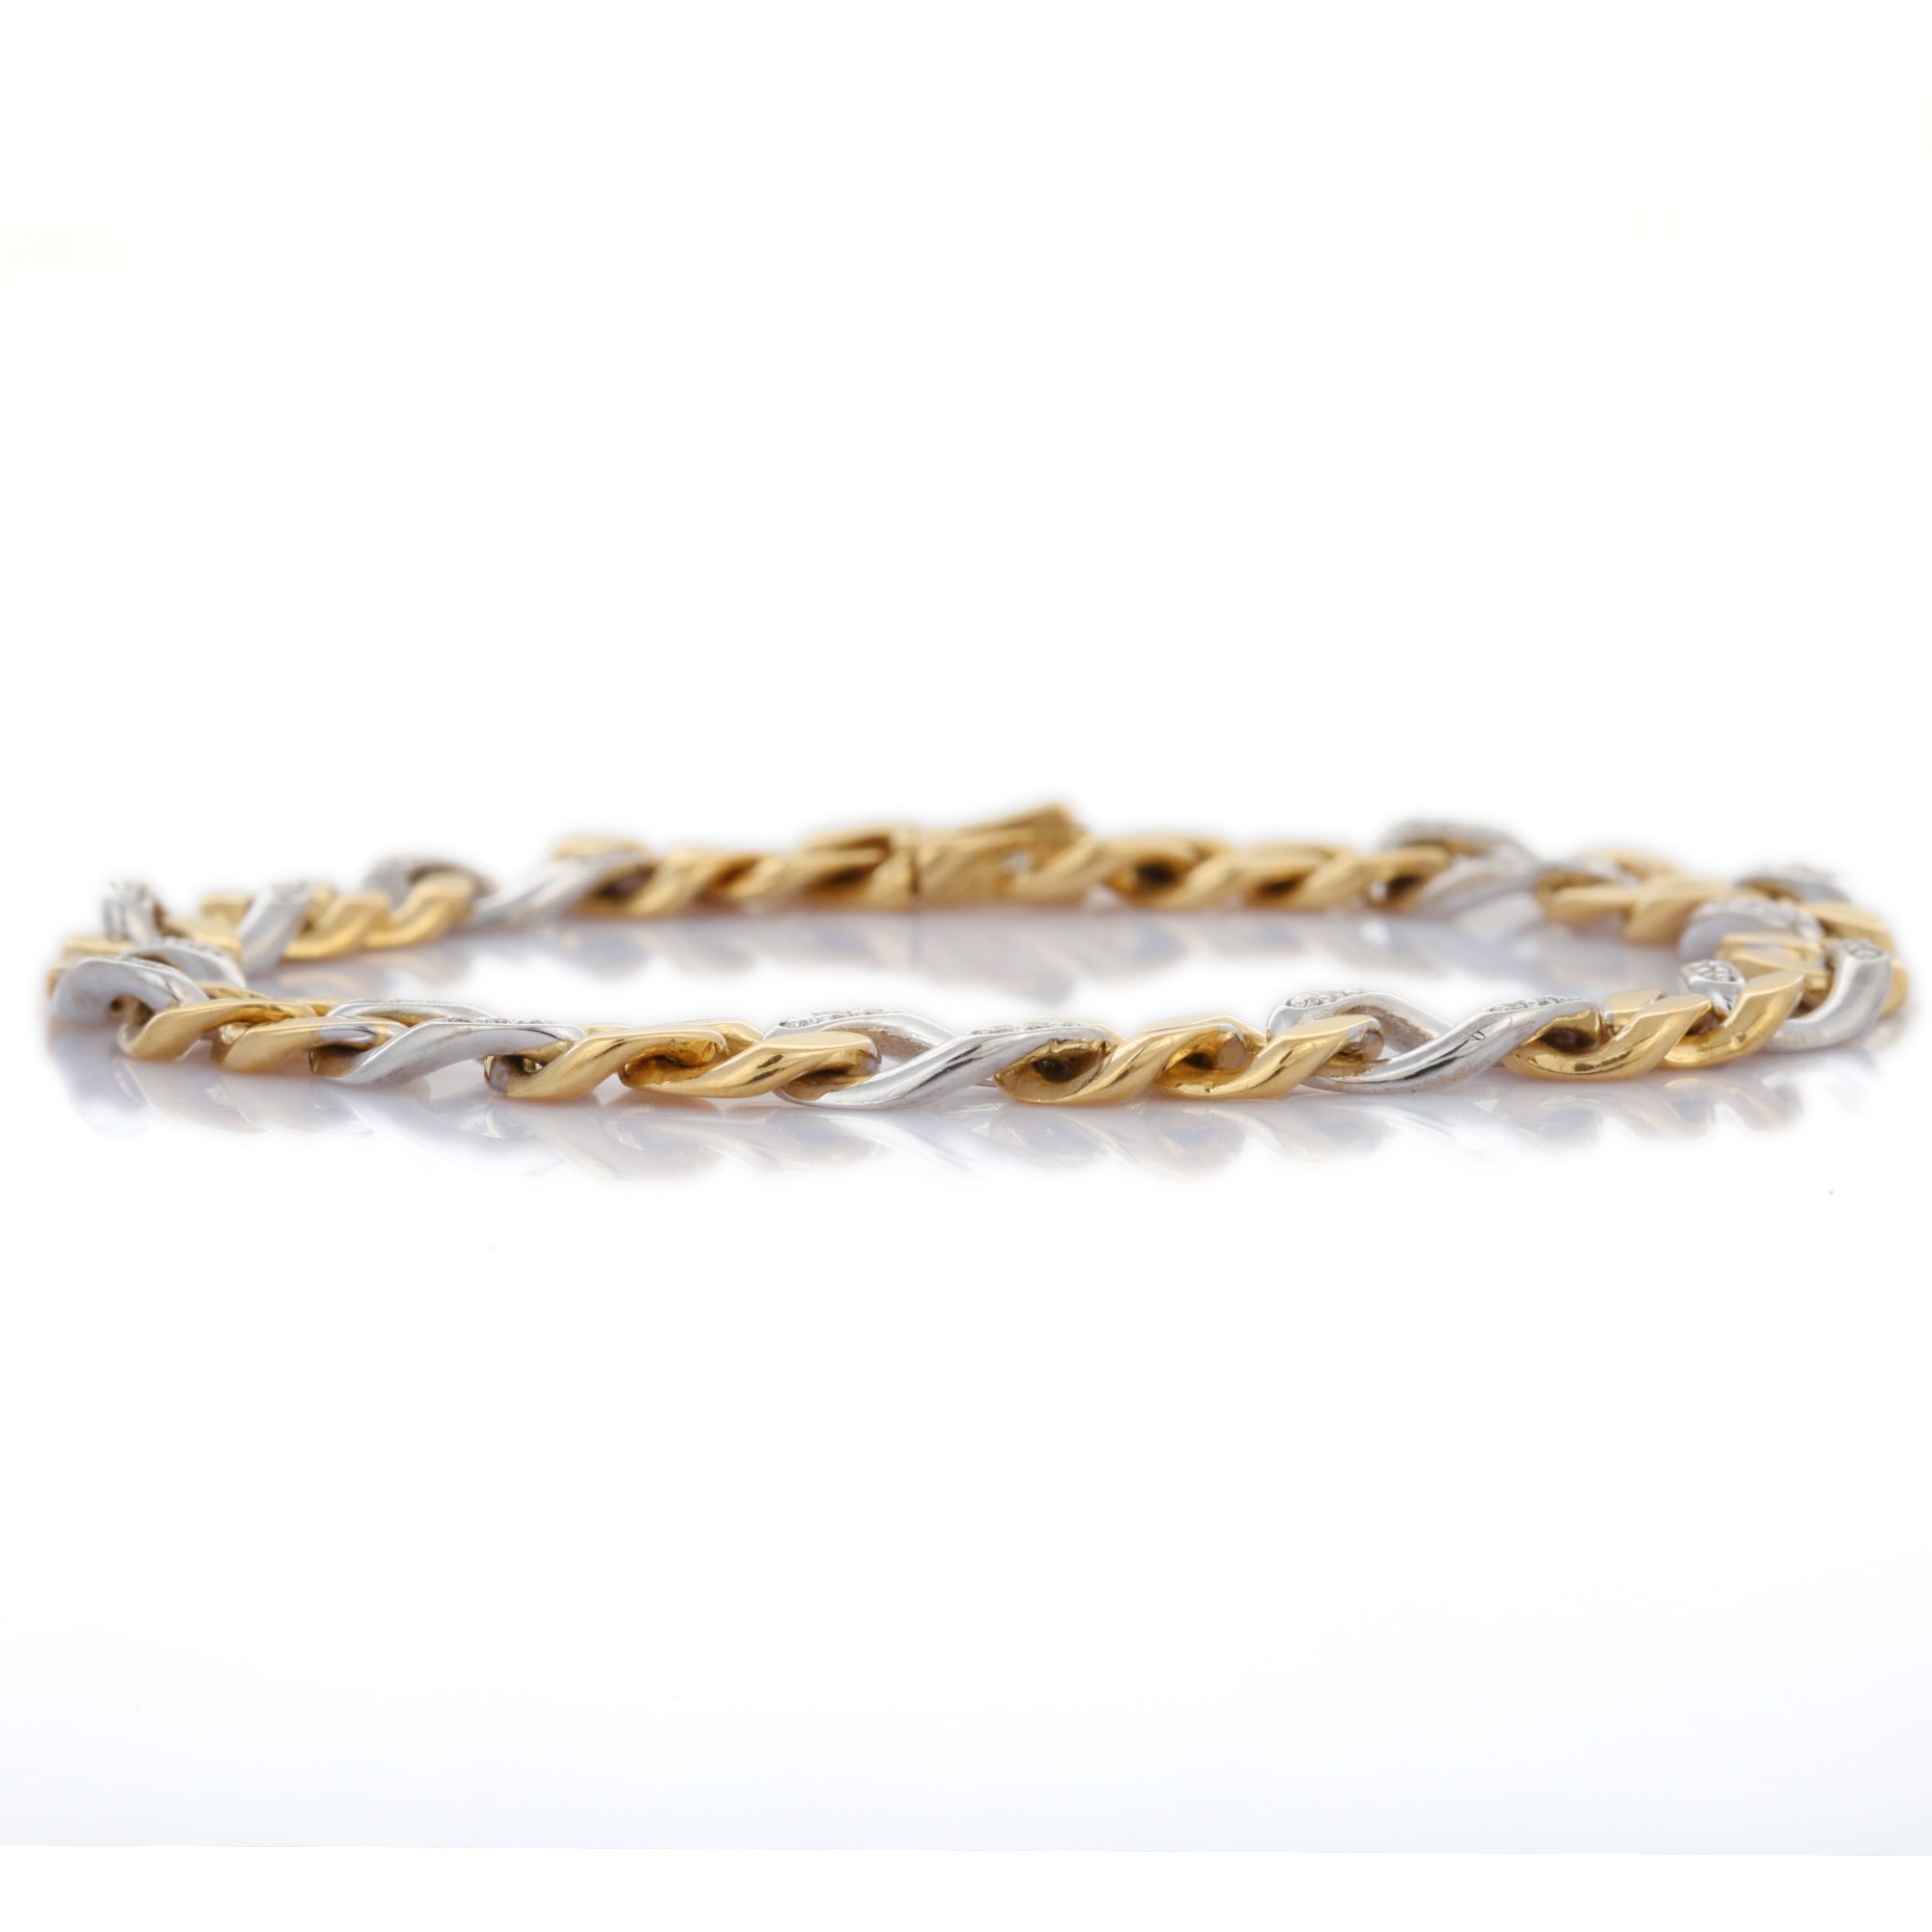 This Men's Diamond Chain Bracelet in 18K gold showcases sparkling natural diamonds, weighing 0.36 carats. 
April birthstone diamond brings love, fame, success and prosperity.
Designed with diamonds studded on a chain to make you stand out on any